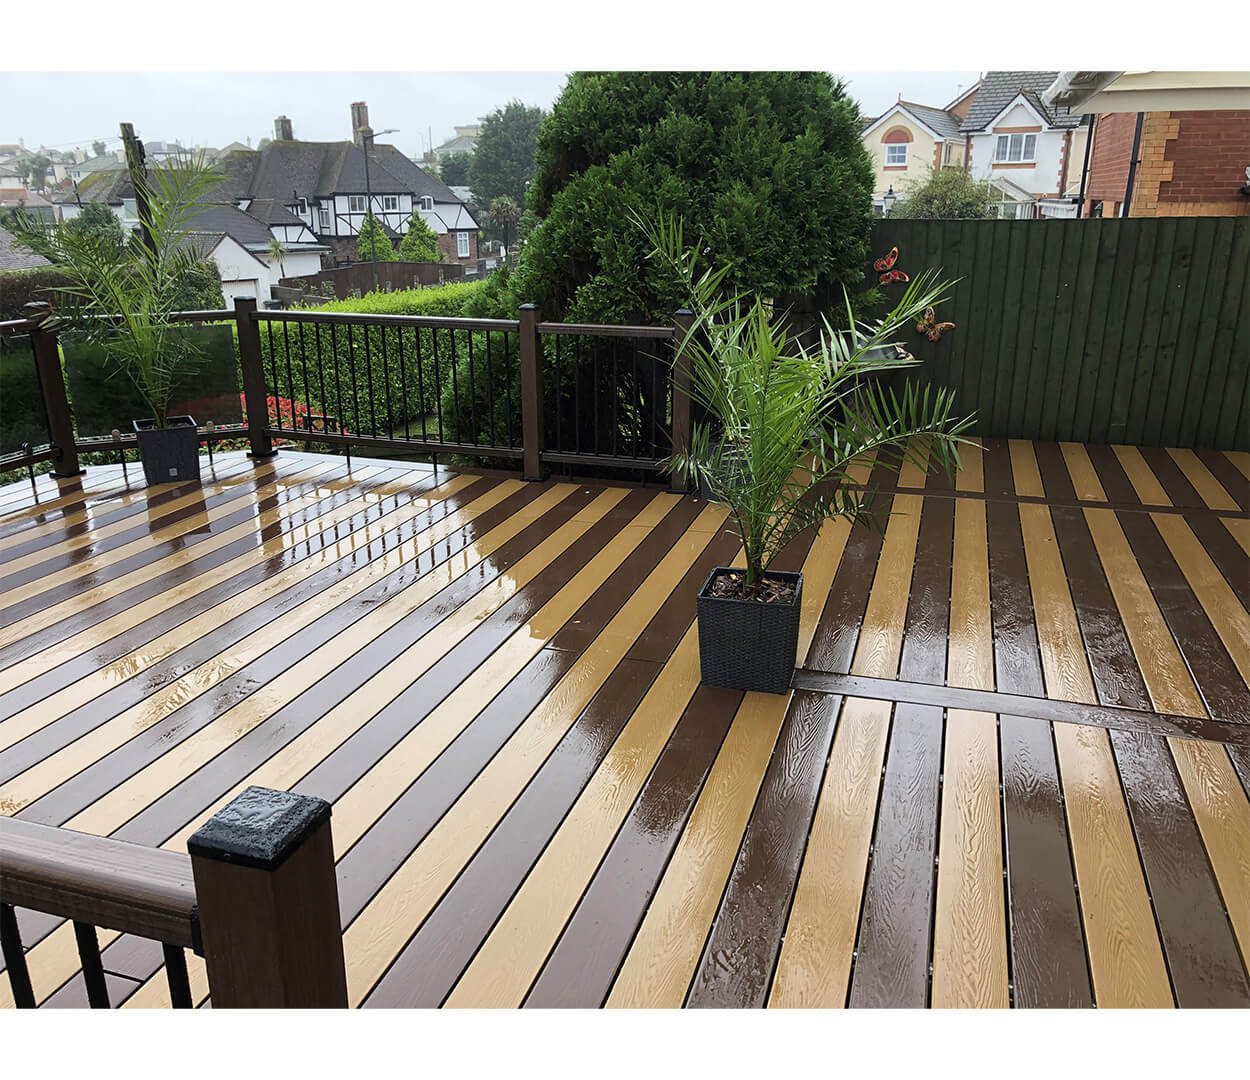 Cladco Composite Woodgrain Decking Boards in Teak and Coffee have created this strikingly unique decking design 